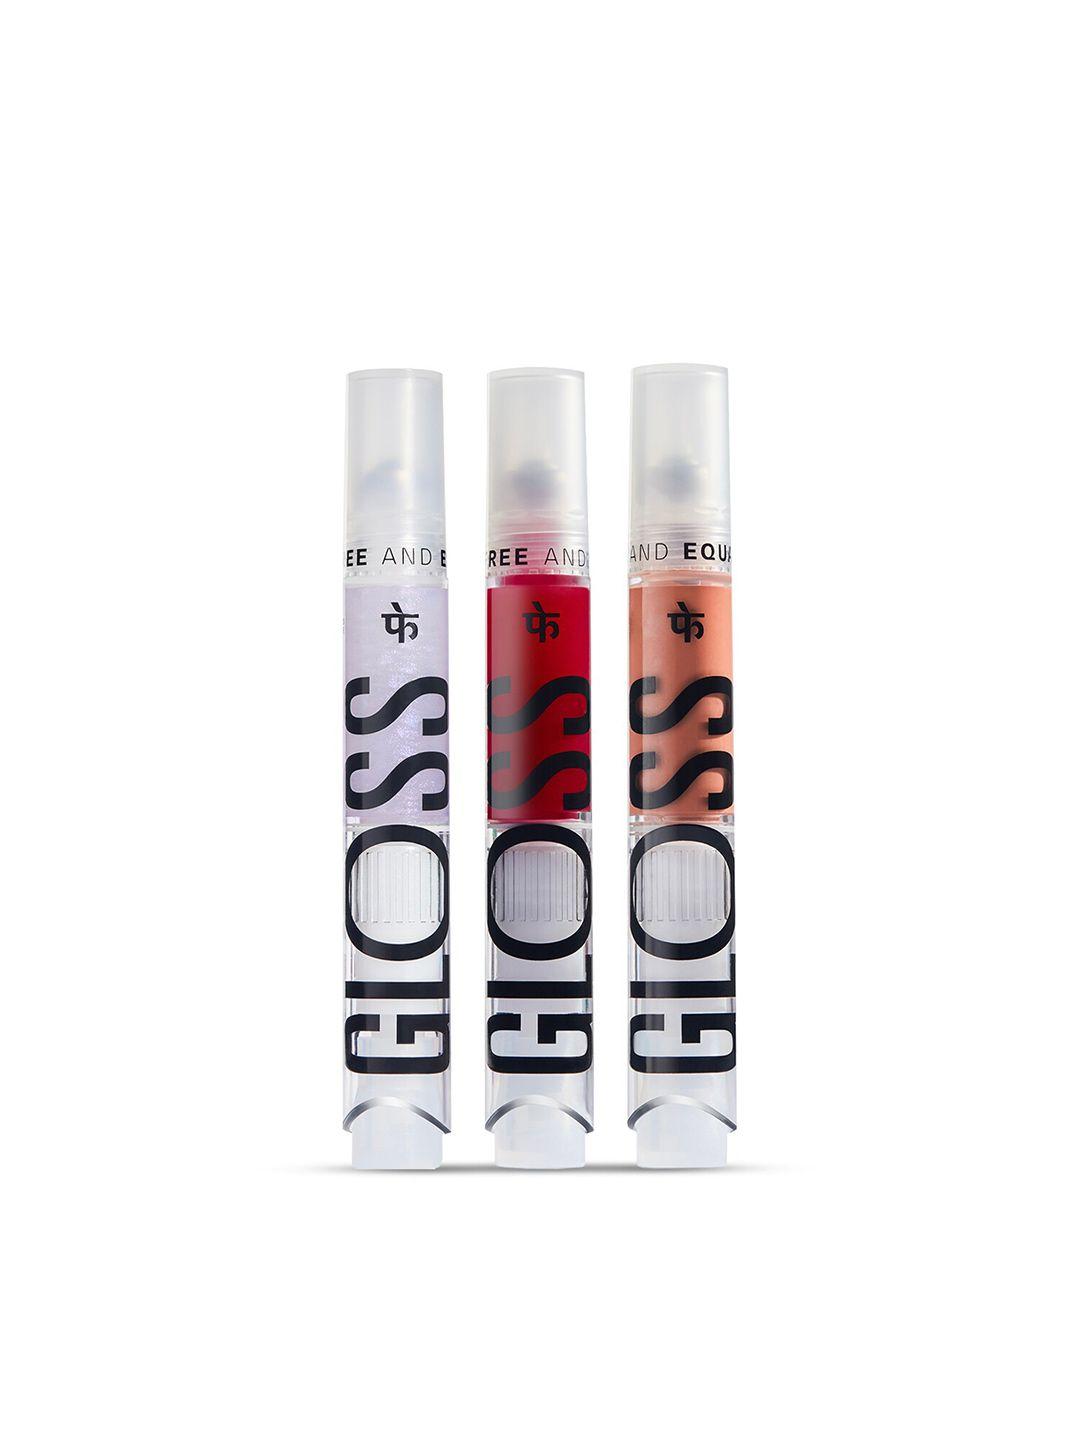 fae beauty gloss set of 3 transforming sizzling belonging lip glosses 18gm-shimmer- cherry red & peachy brown